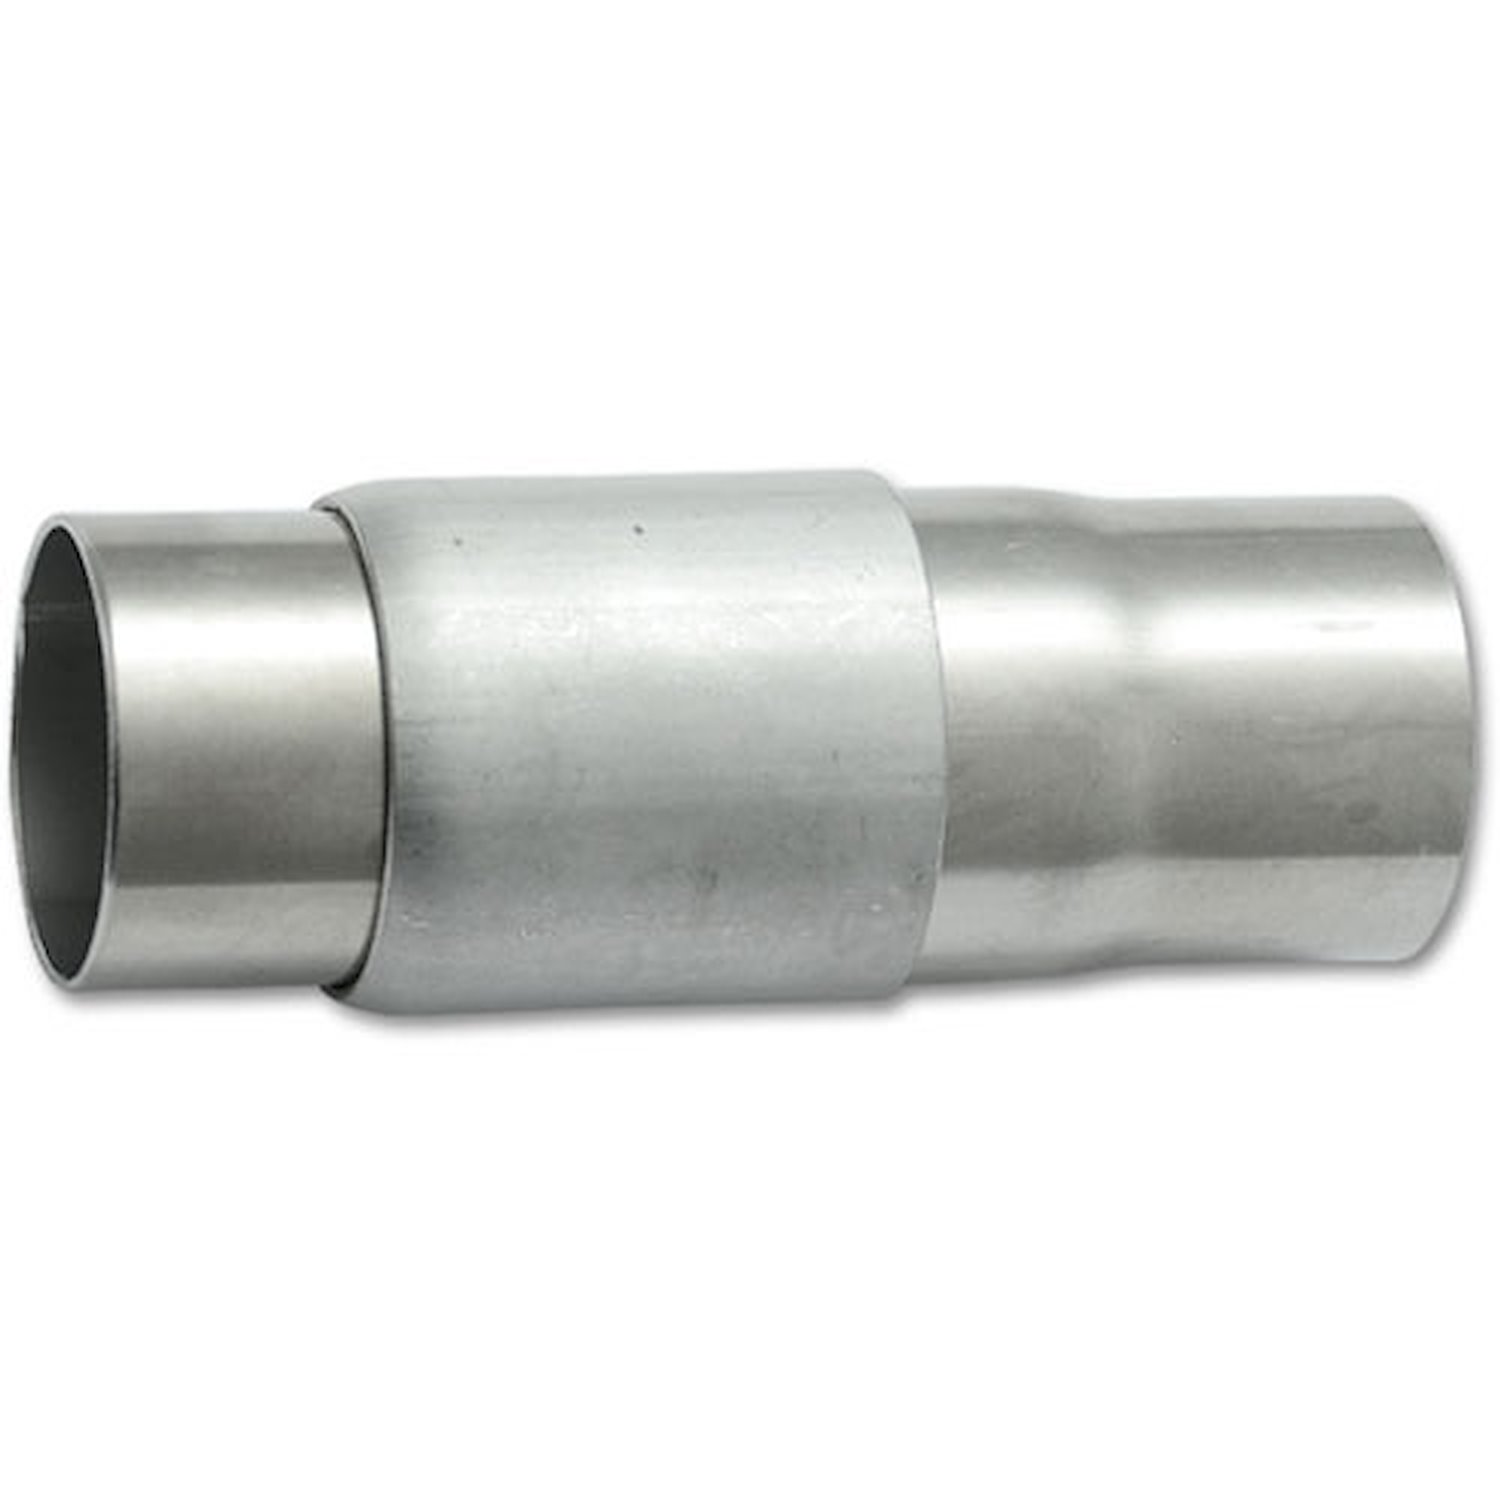 Double Slip Joint Fitting For use with 2" O.D. Tubing